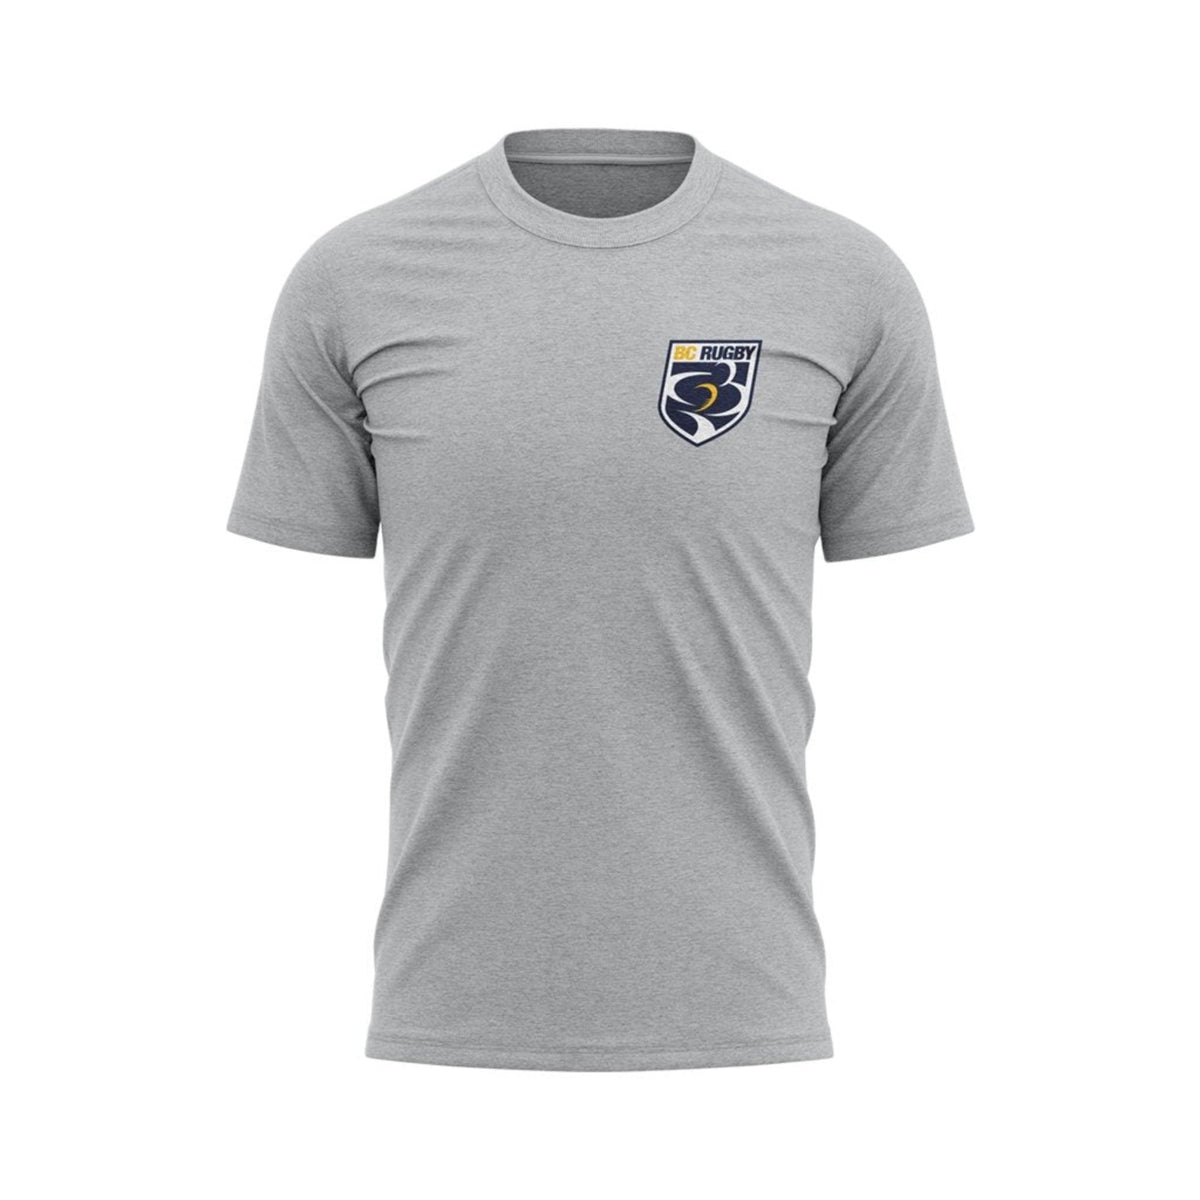 BC Rugby 2022 Shield Tee - www.therugbyshop.com www.therugbyshop.com MEN&#39;S / GREY - SMALL LOGO / S XIX Brands TEES BC Rugby 2022 Shield Tee